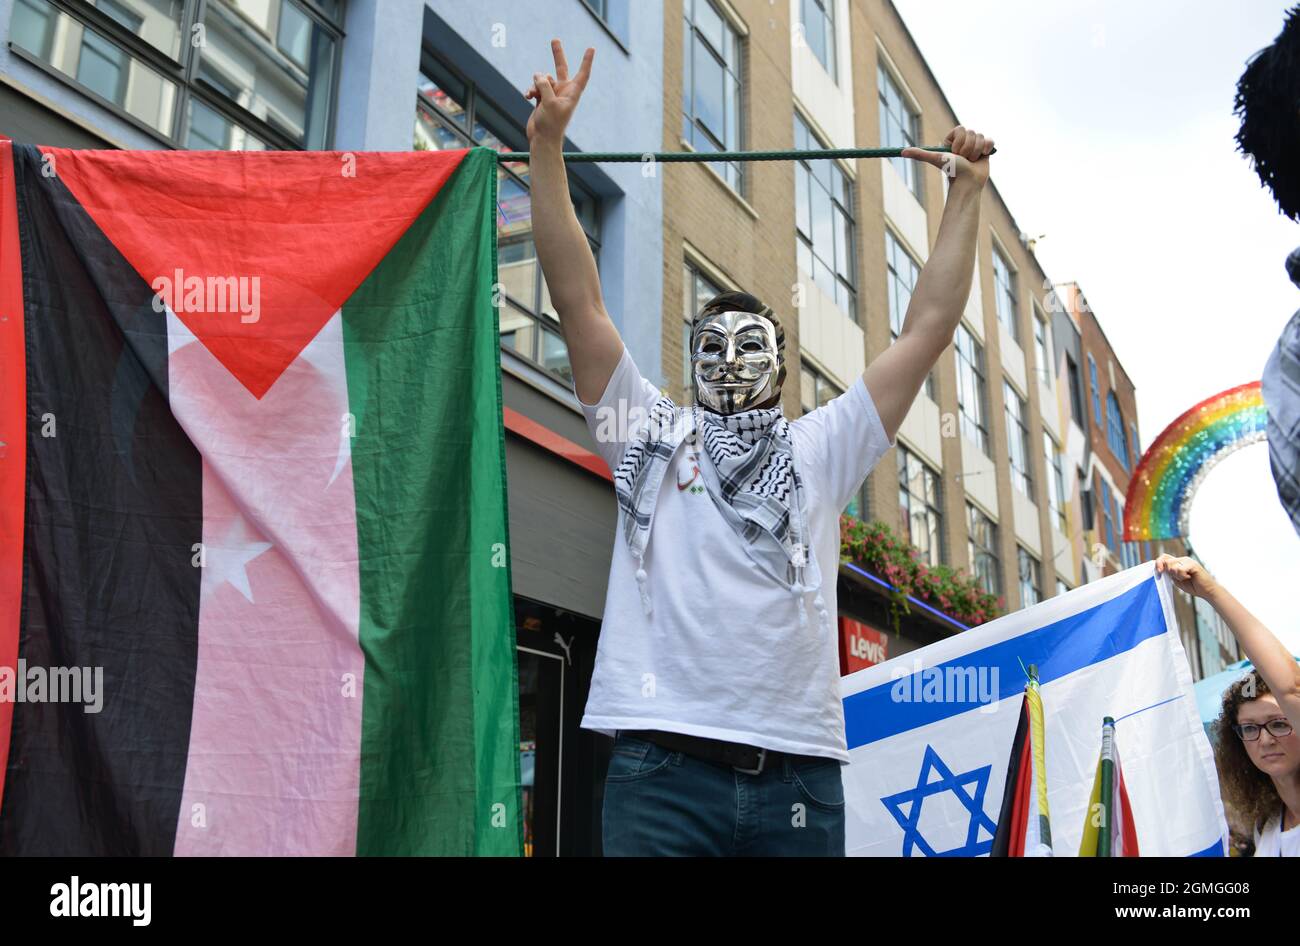 A protestor wearing a Guy Fawkes mask holding a Palestinian flag, during the demonstration. Boycott Puma protest organized by Palestine Solidarity Campaign and FOA (Friends of Al Aqsa) at Puma flagship store on Carnaby Street, London. Stock Photo